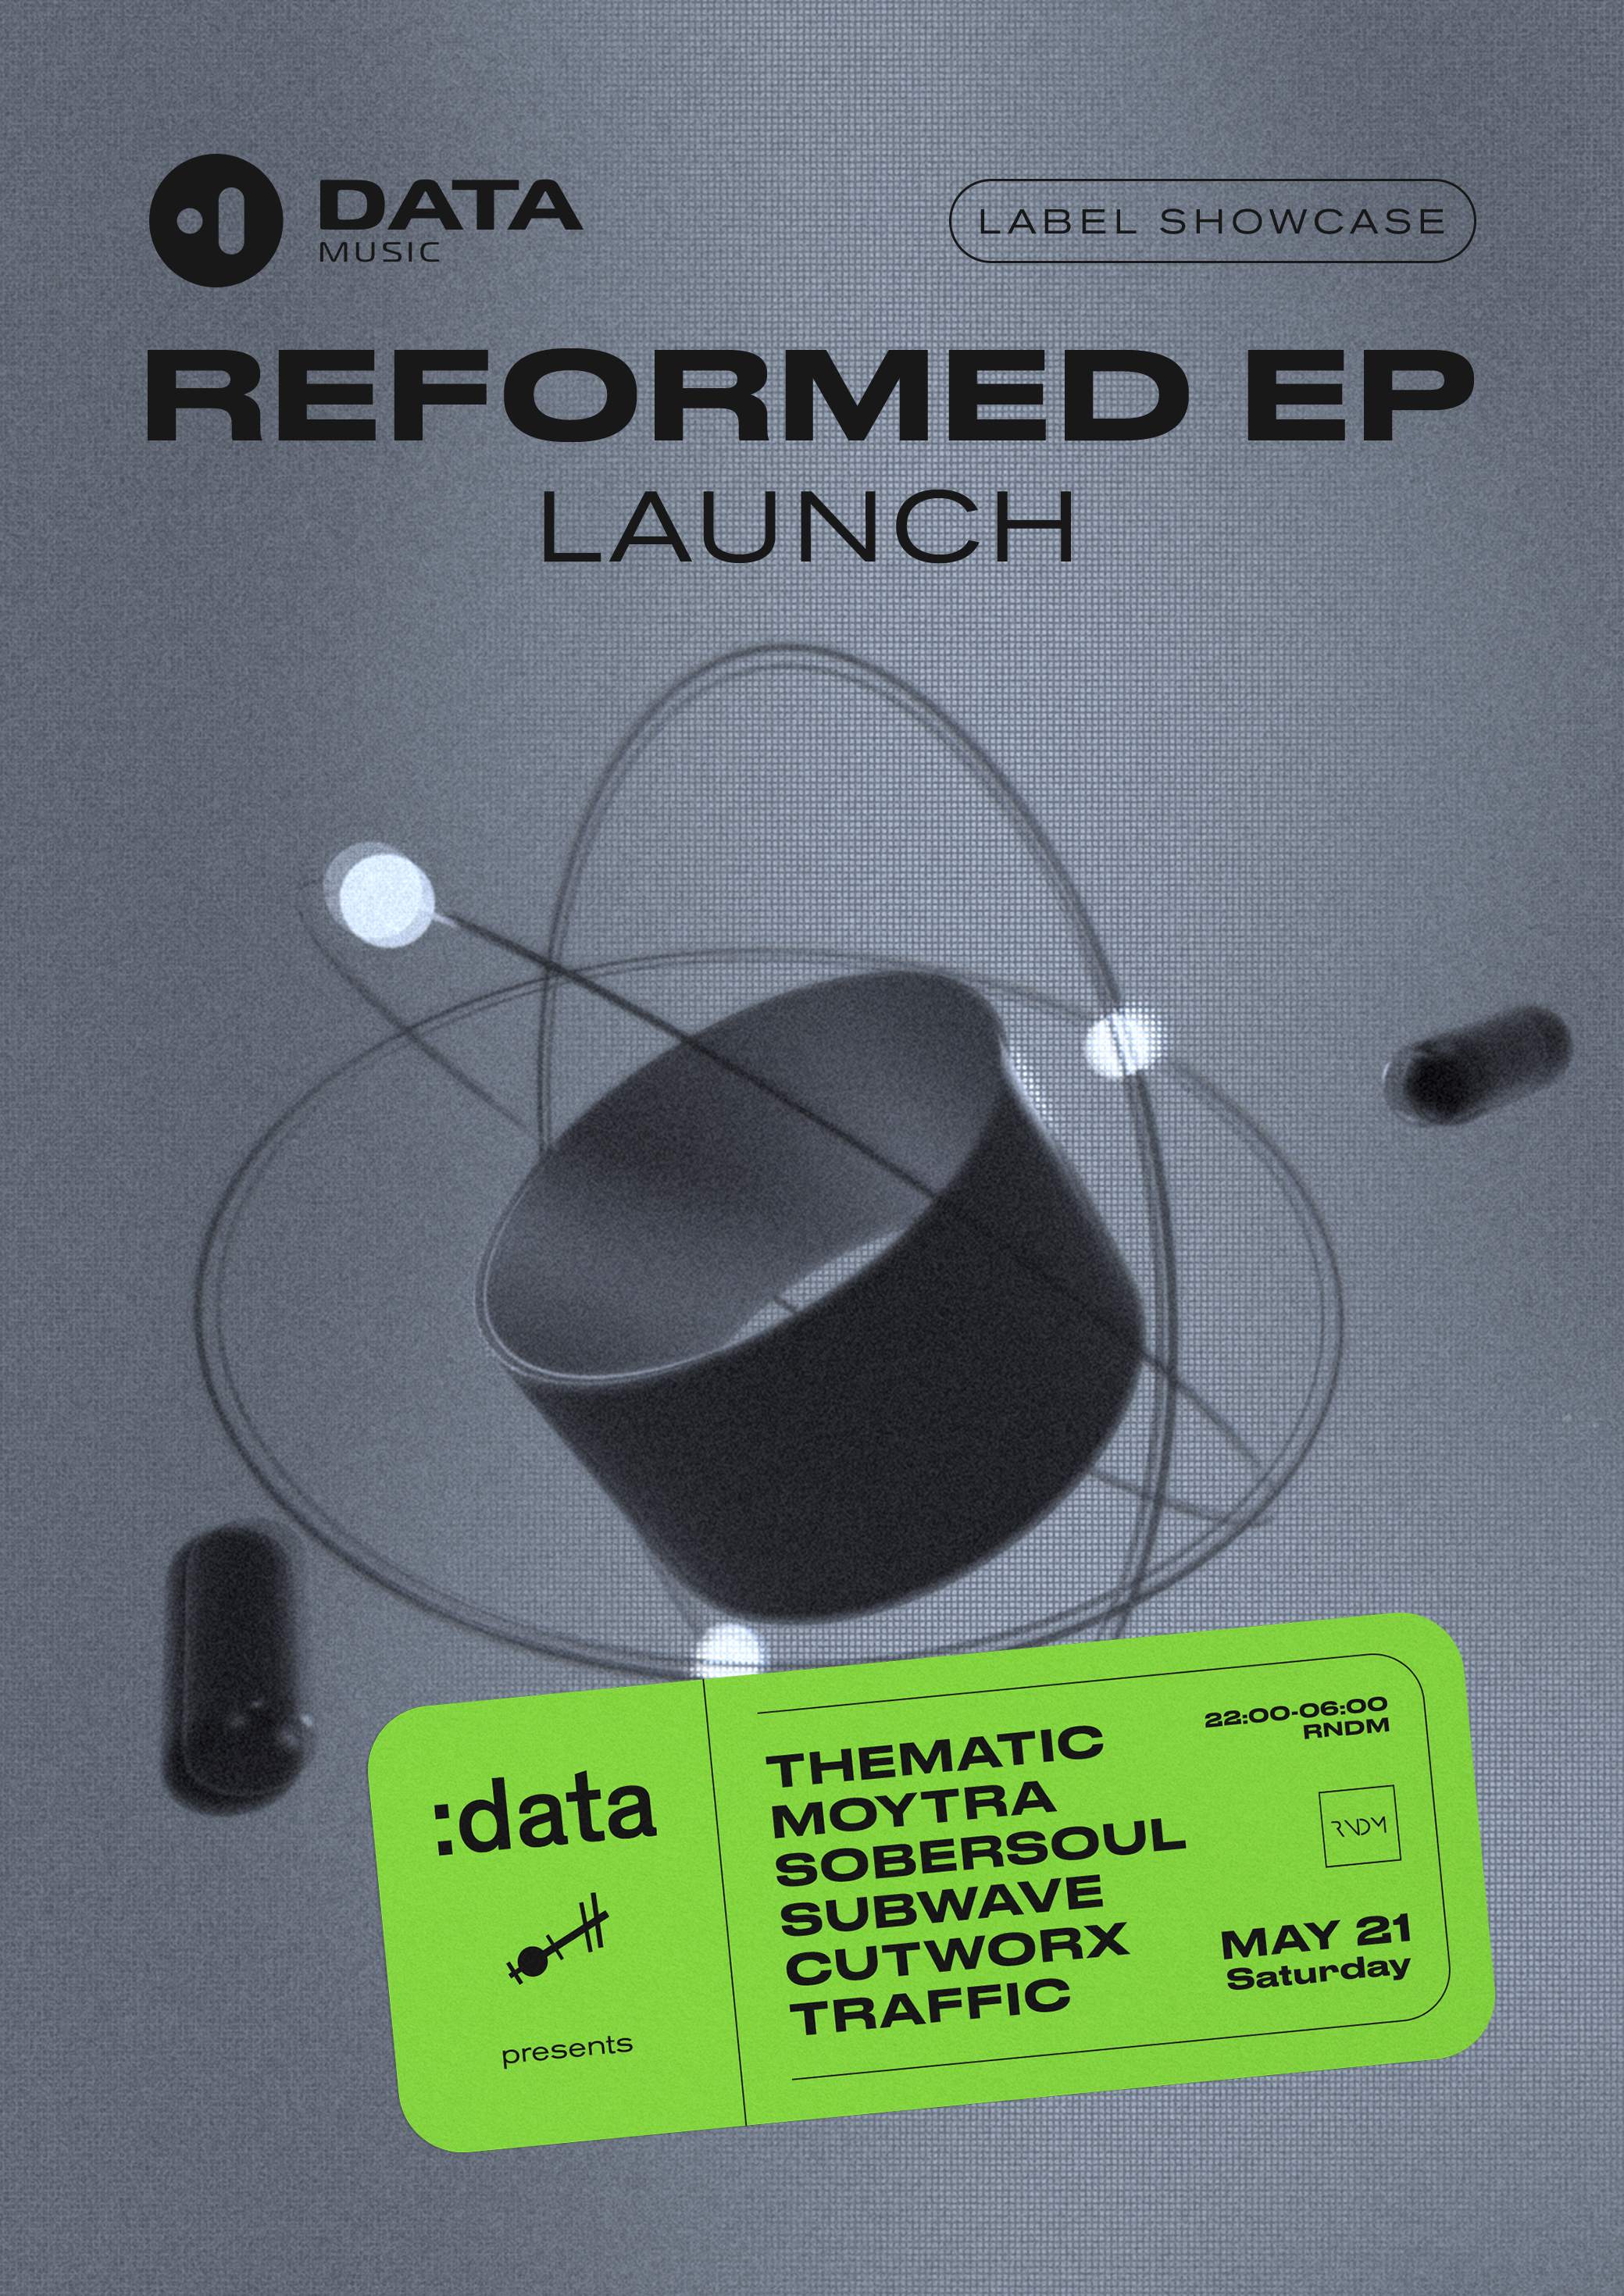 Data Music - Reformed EP Launch - フライヤー表